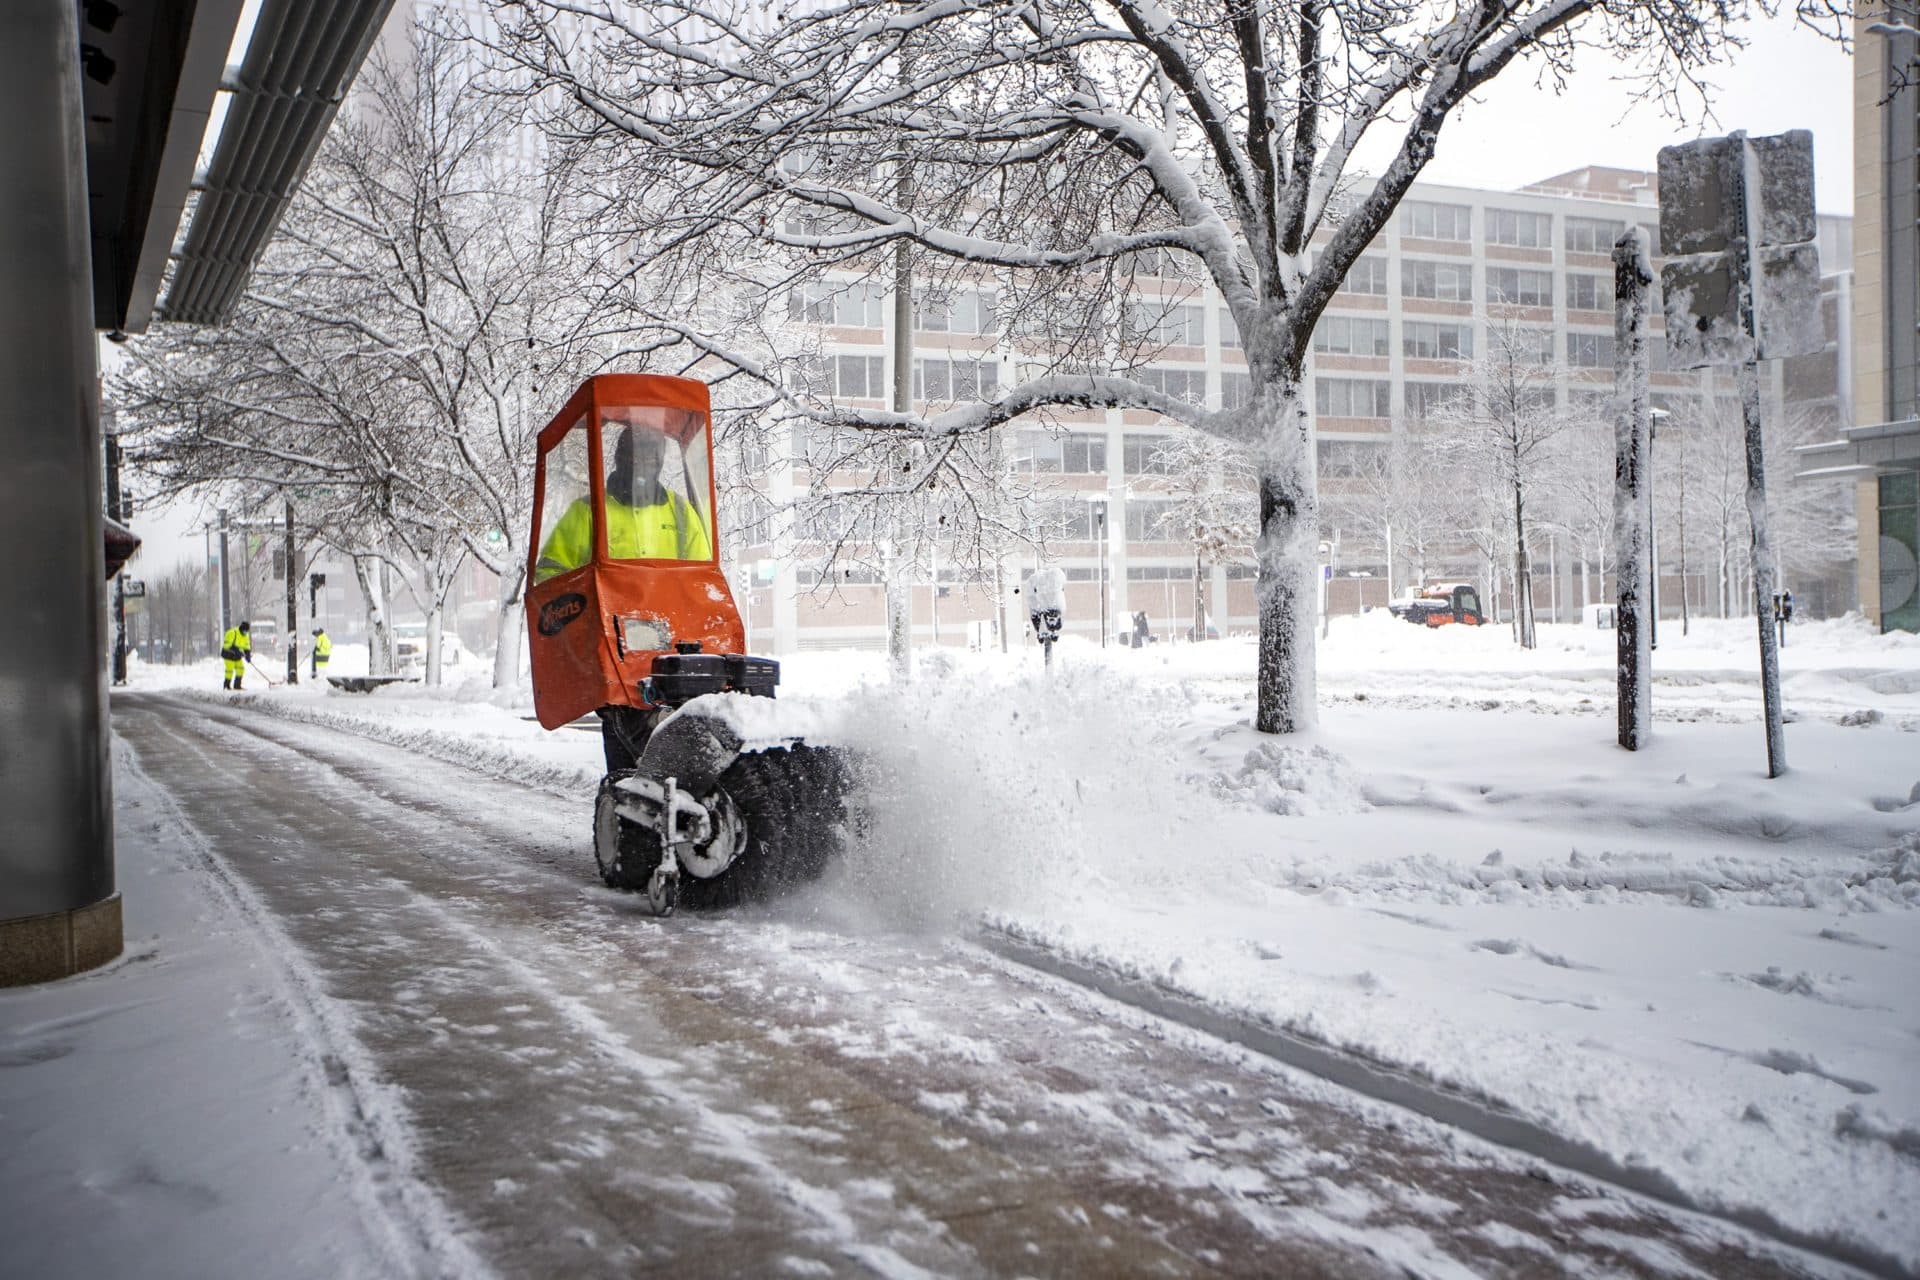 Workers clear snow from the walkway in front of the Broad Institute in Kendall Sq. (Jesse Costa/WBUR)